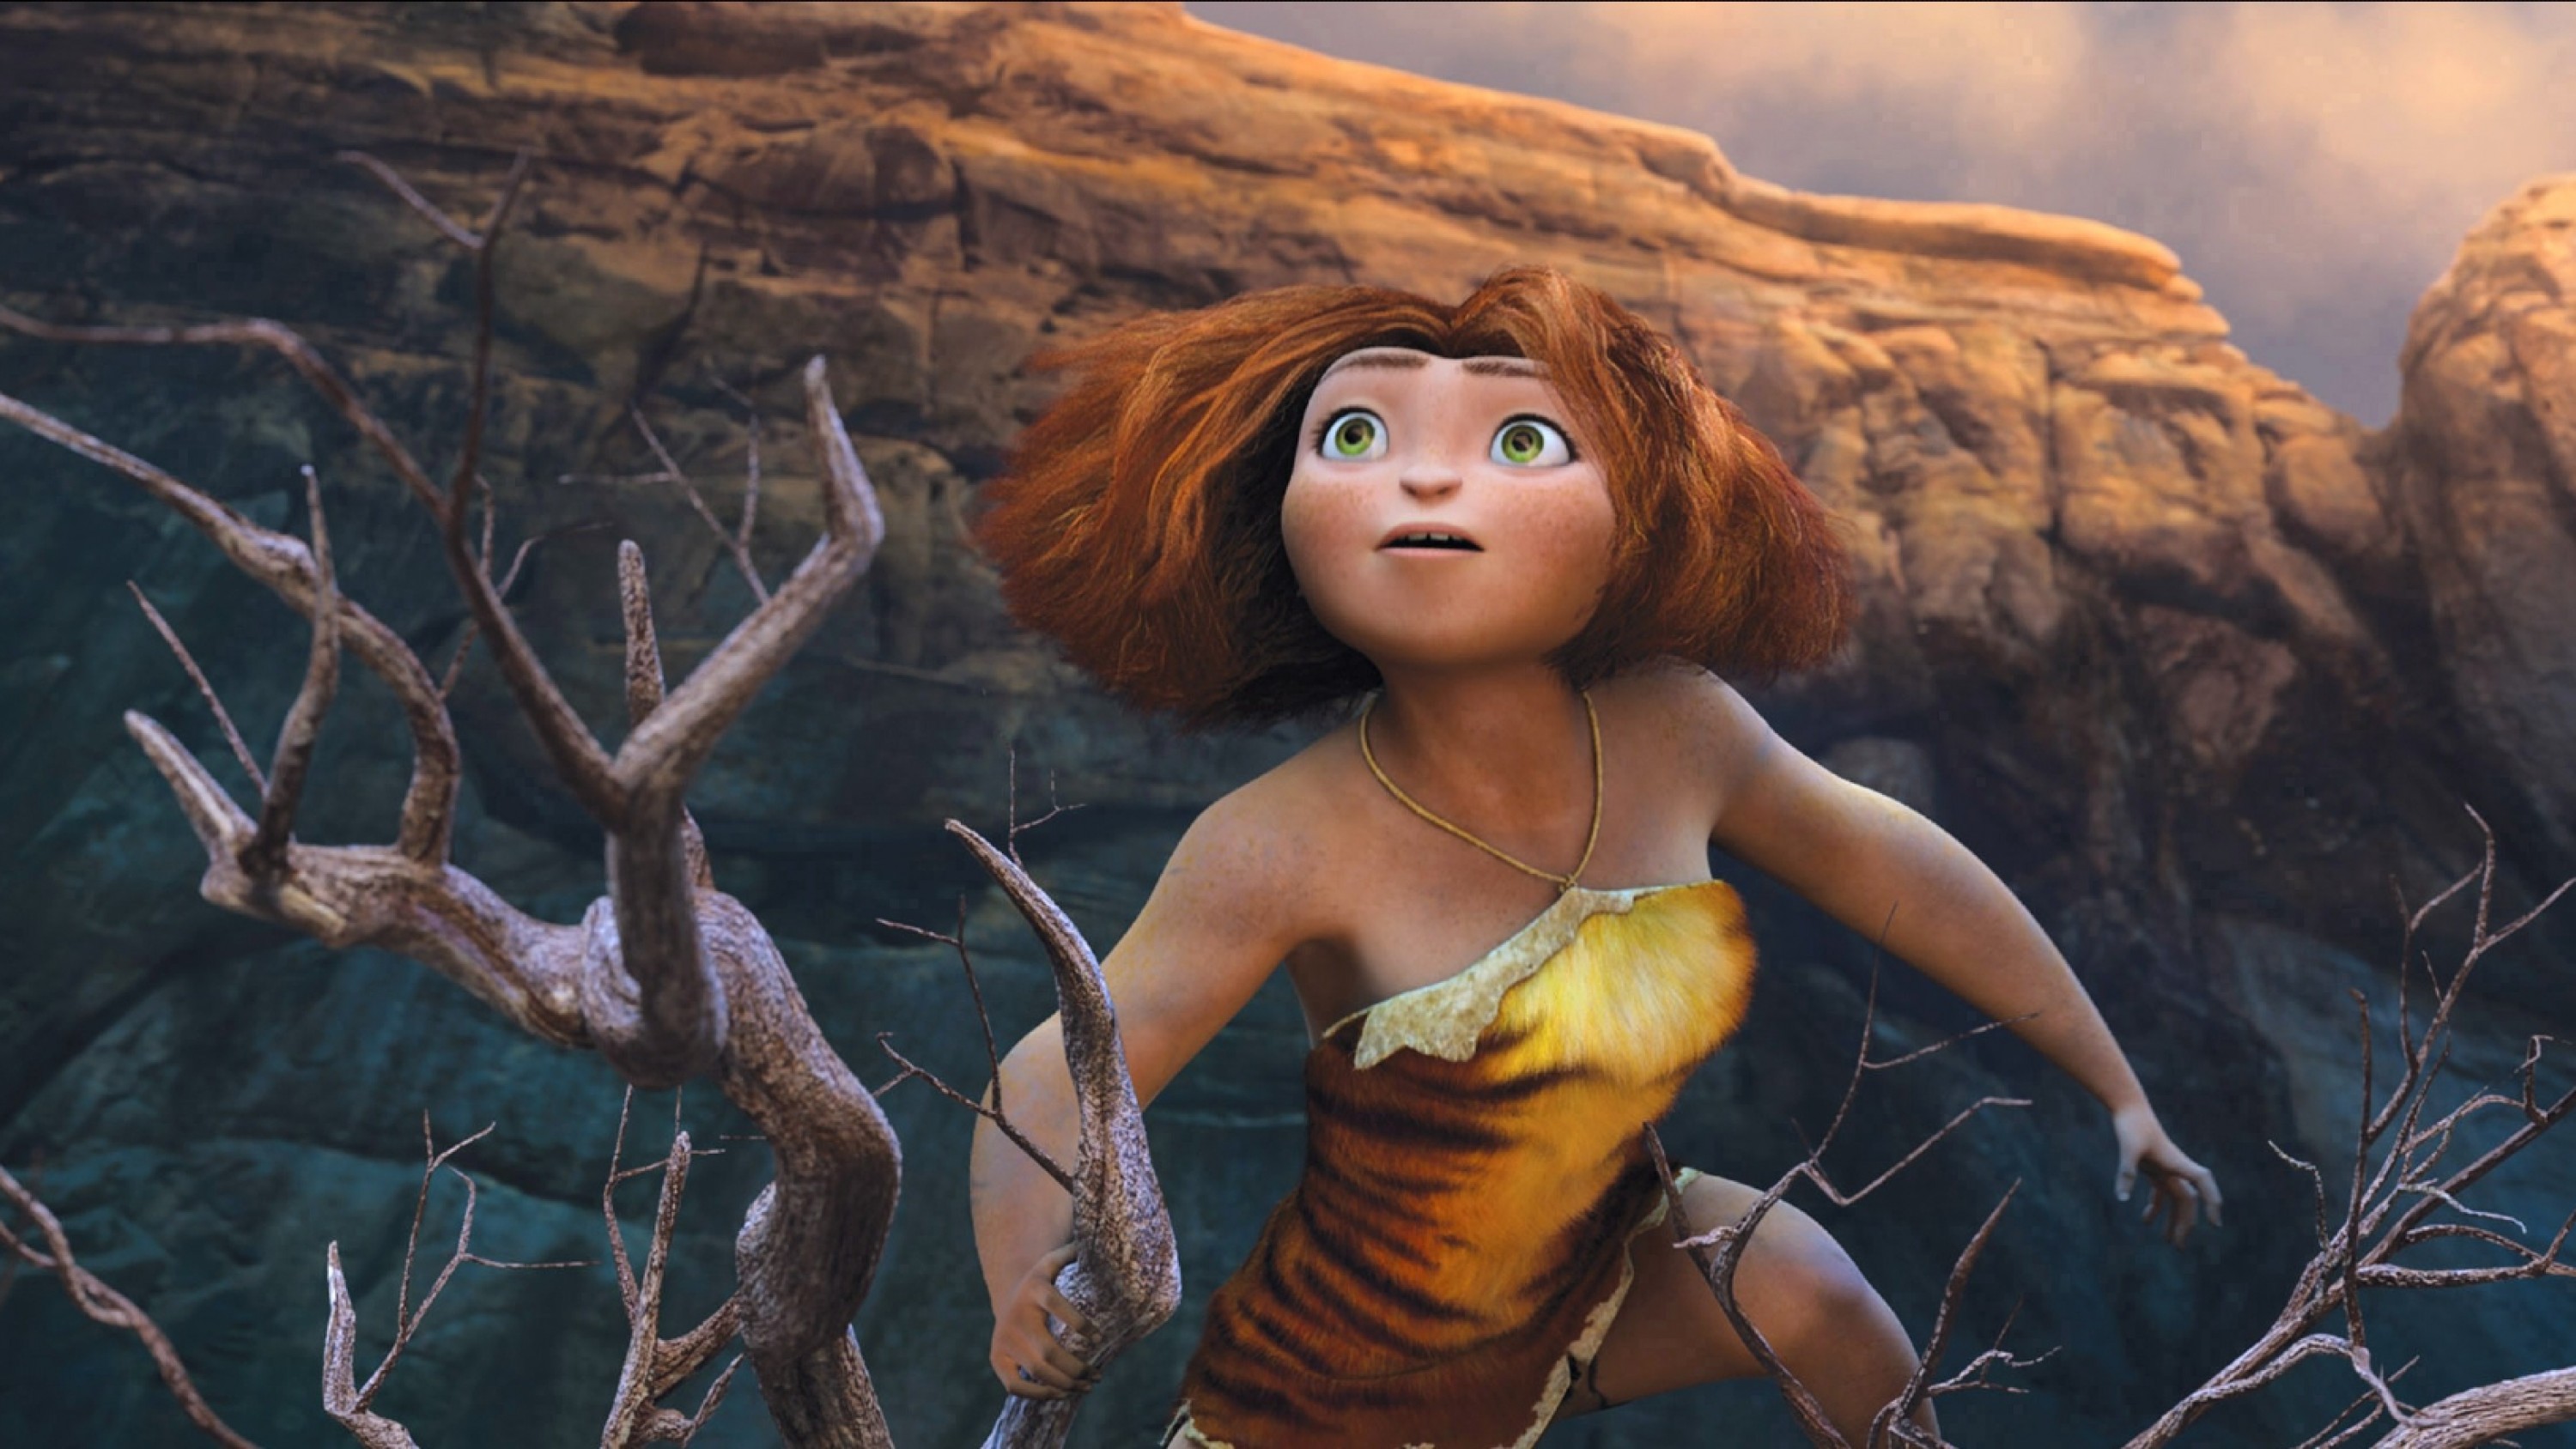 The Croods.